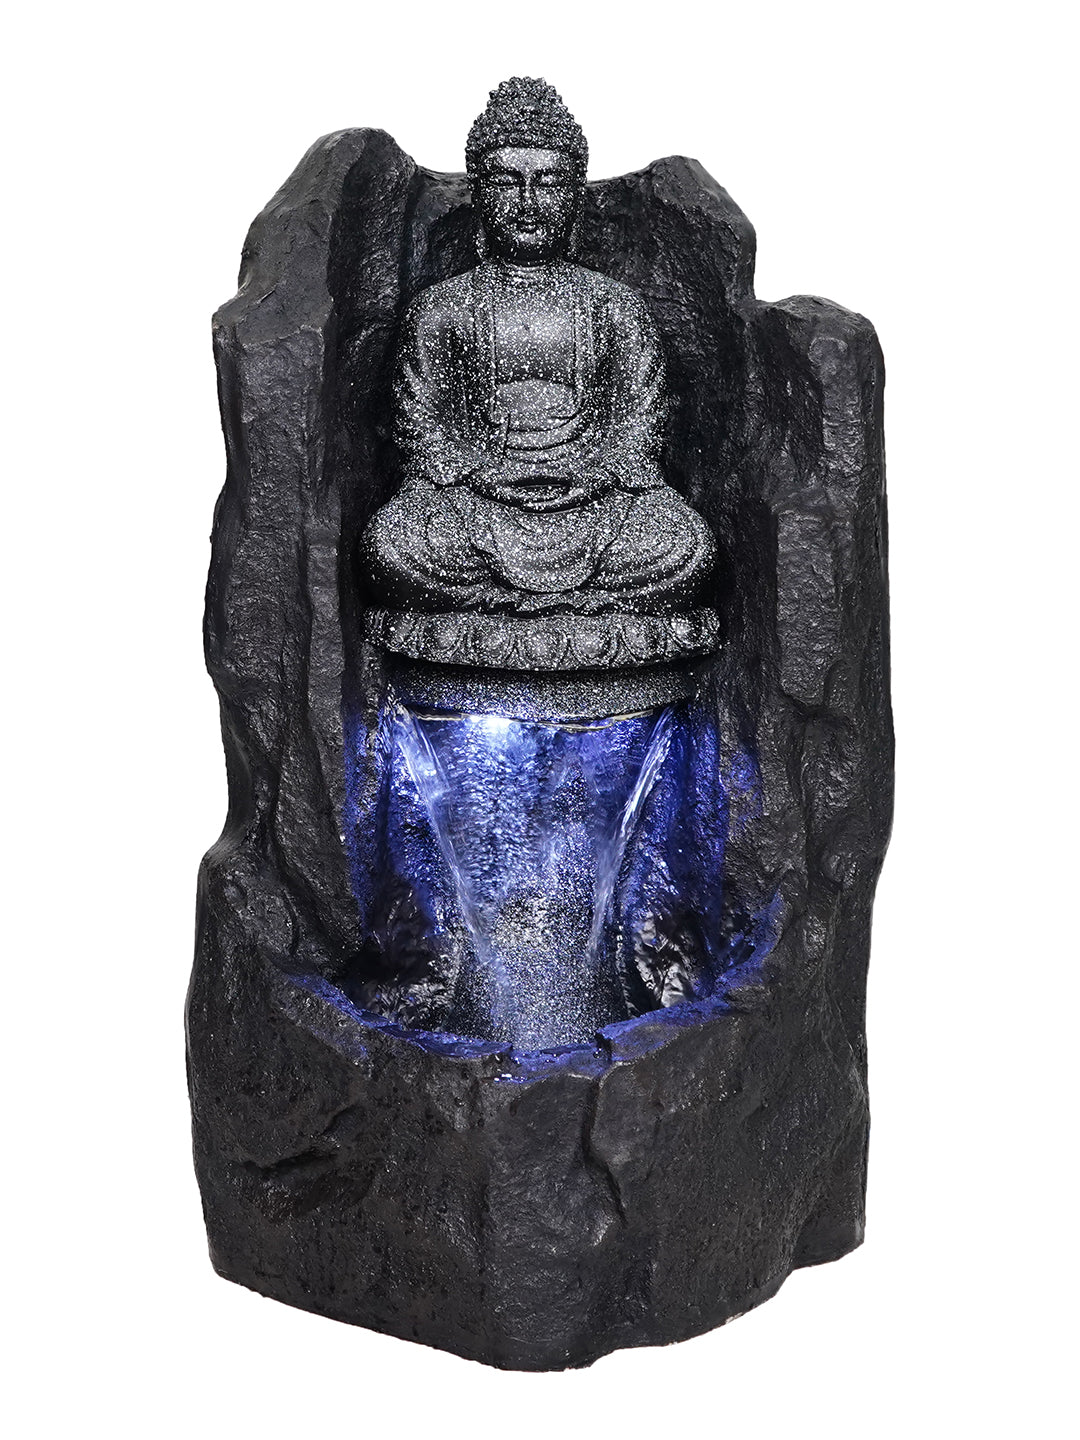 Black Polyresin Indoor Buddha Water Fountain With LED Light for Home/Living Room/Hall/Office Décor